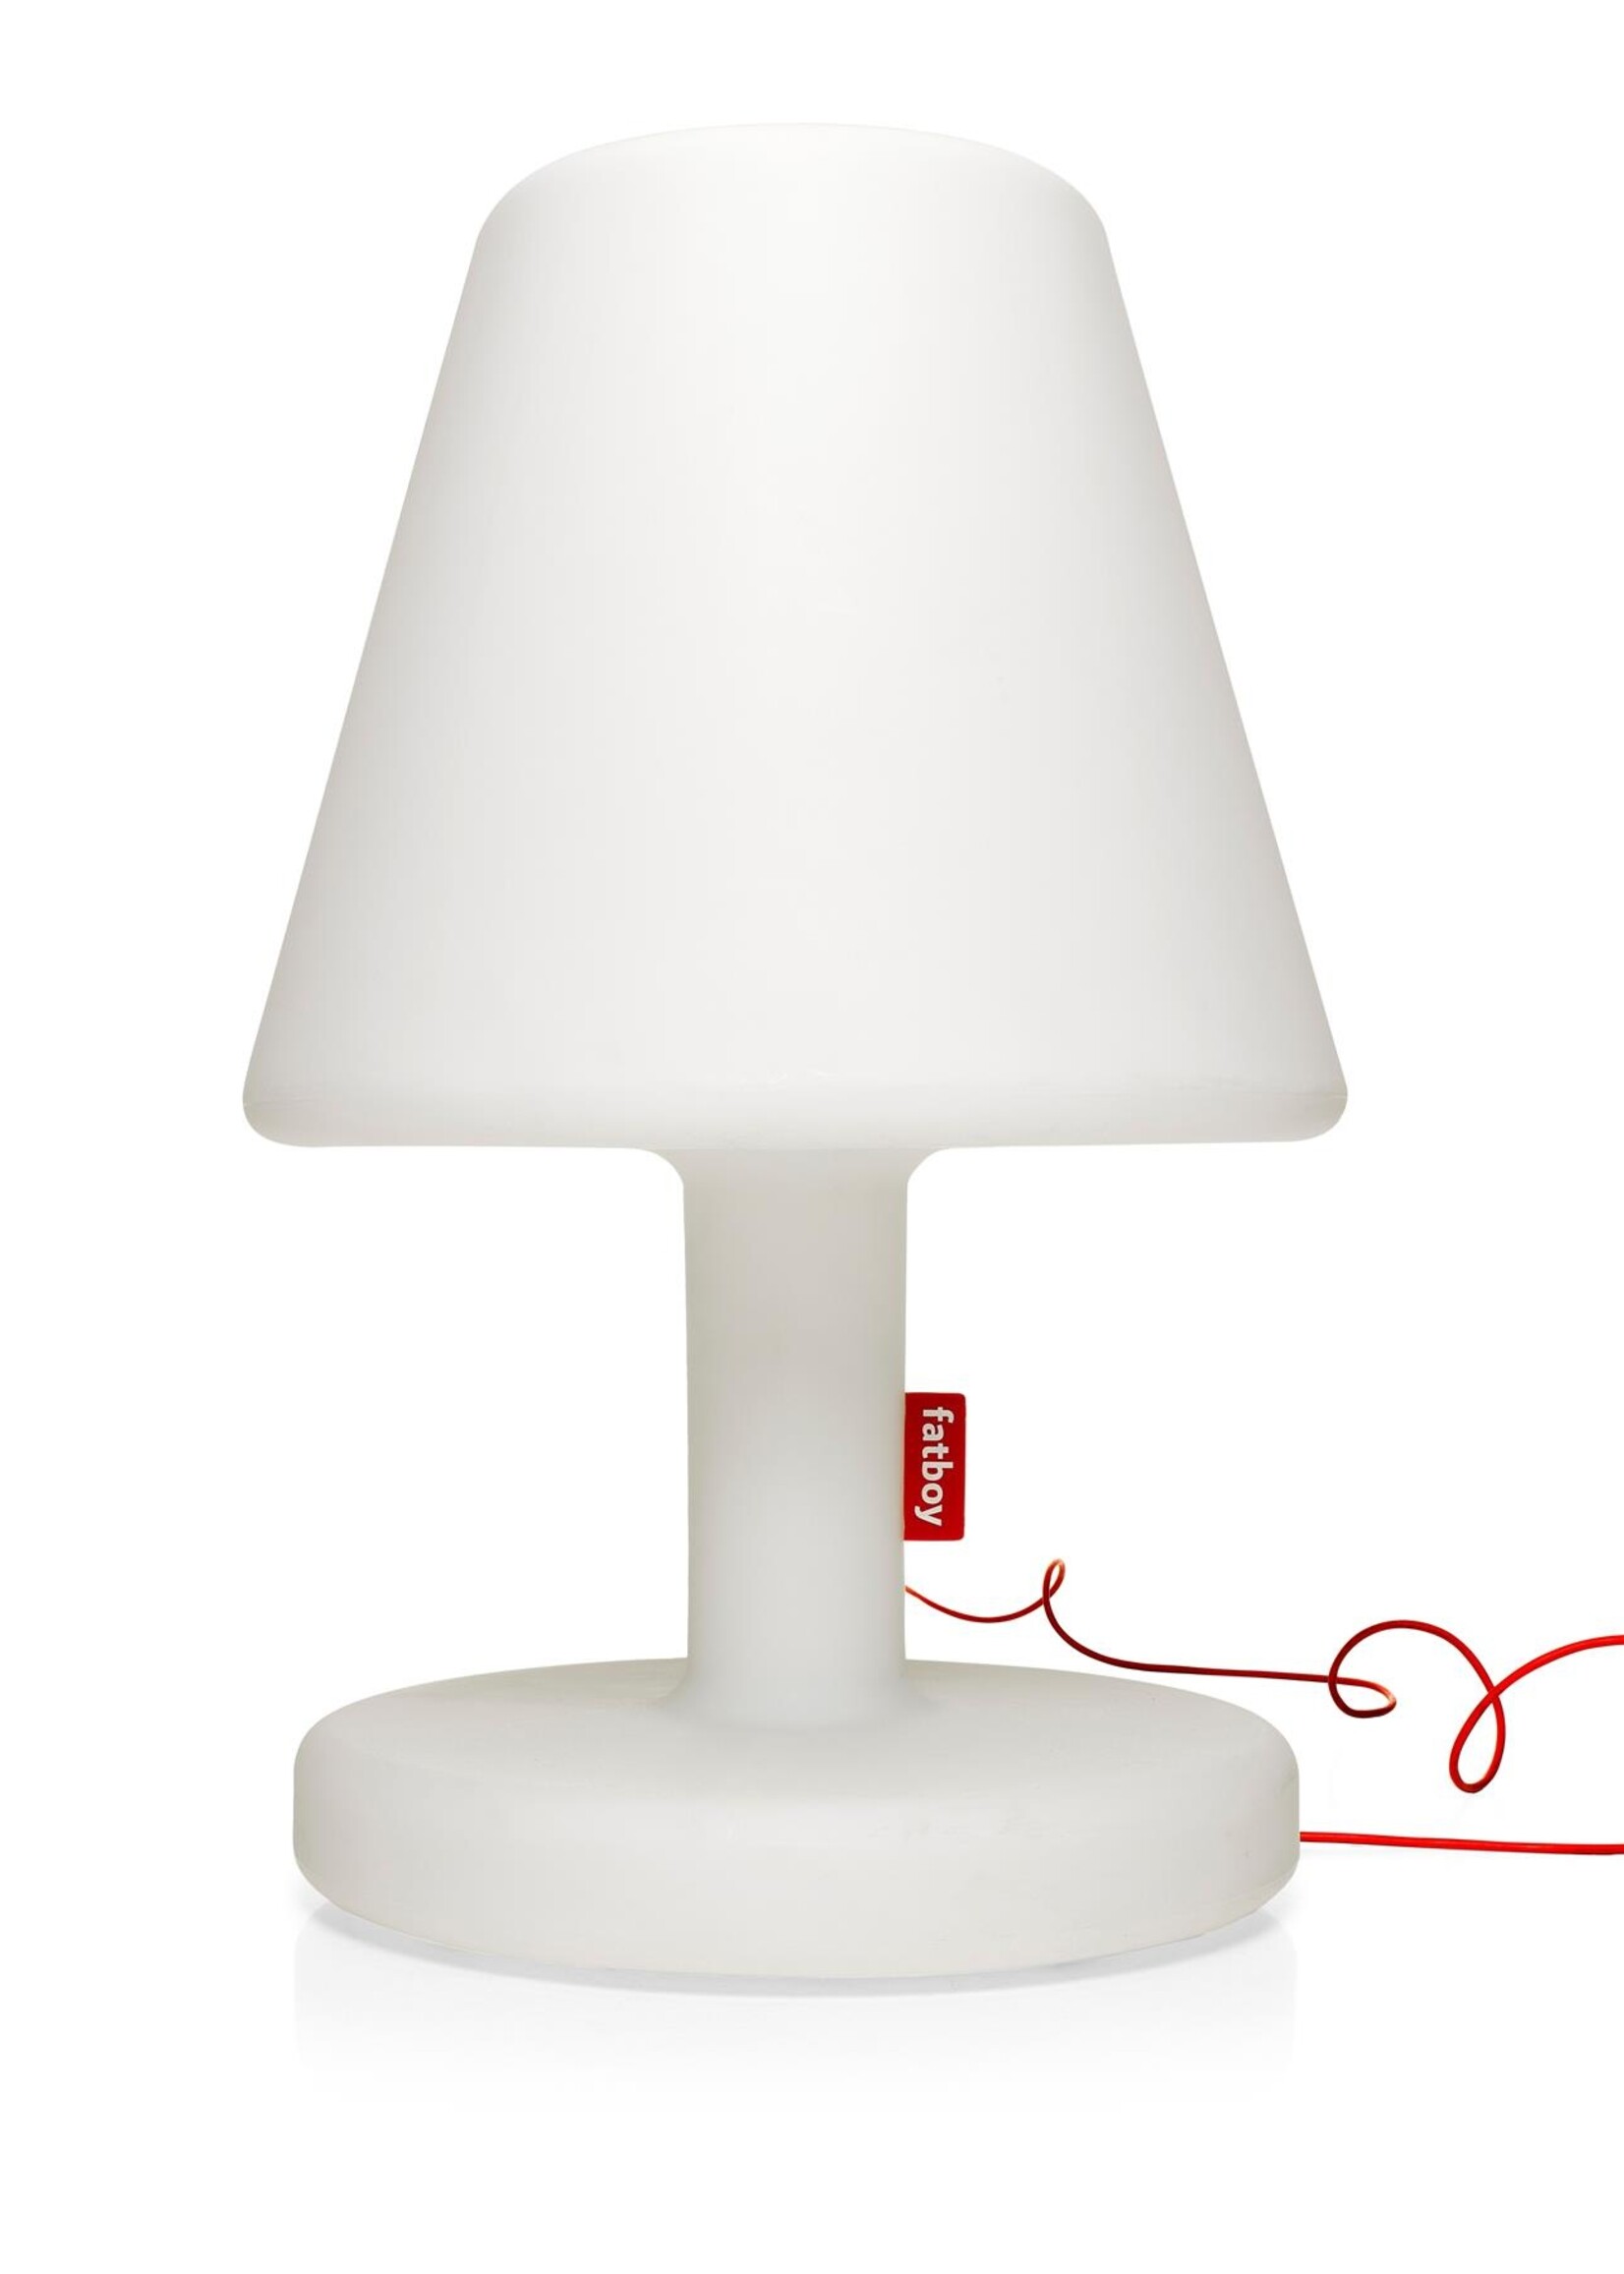 Fatboy Fatboy Edison Staande lamp - The Medium connect - Wit